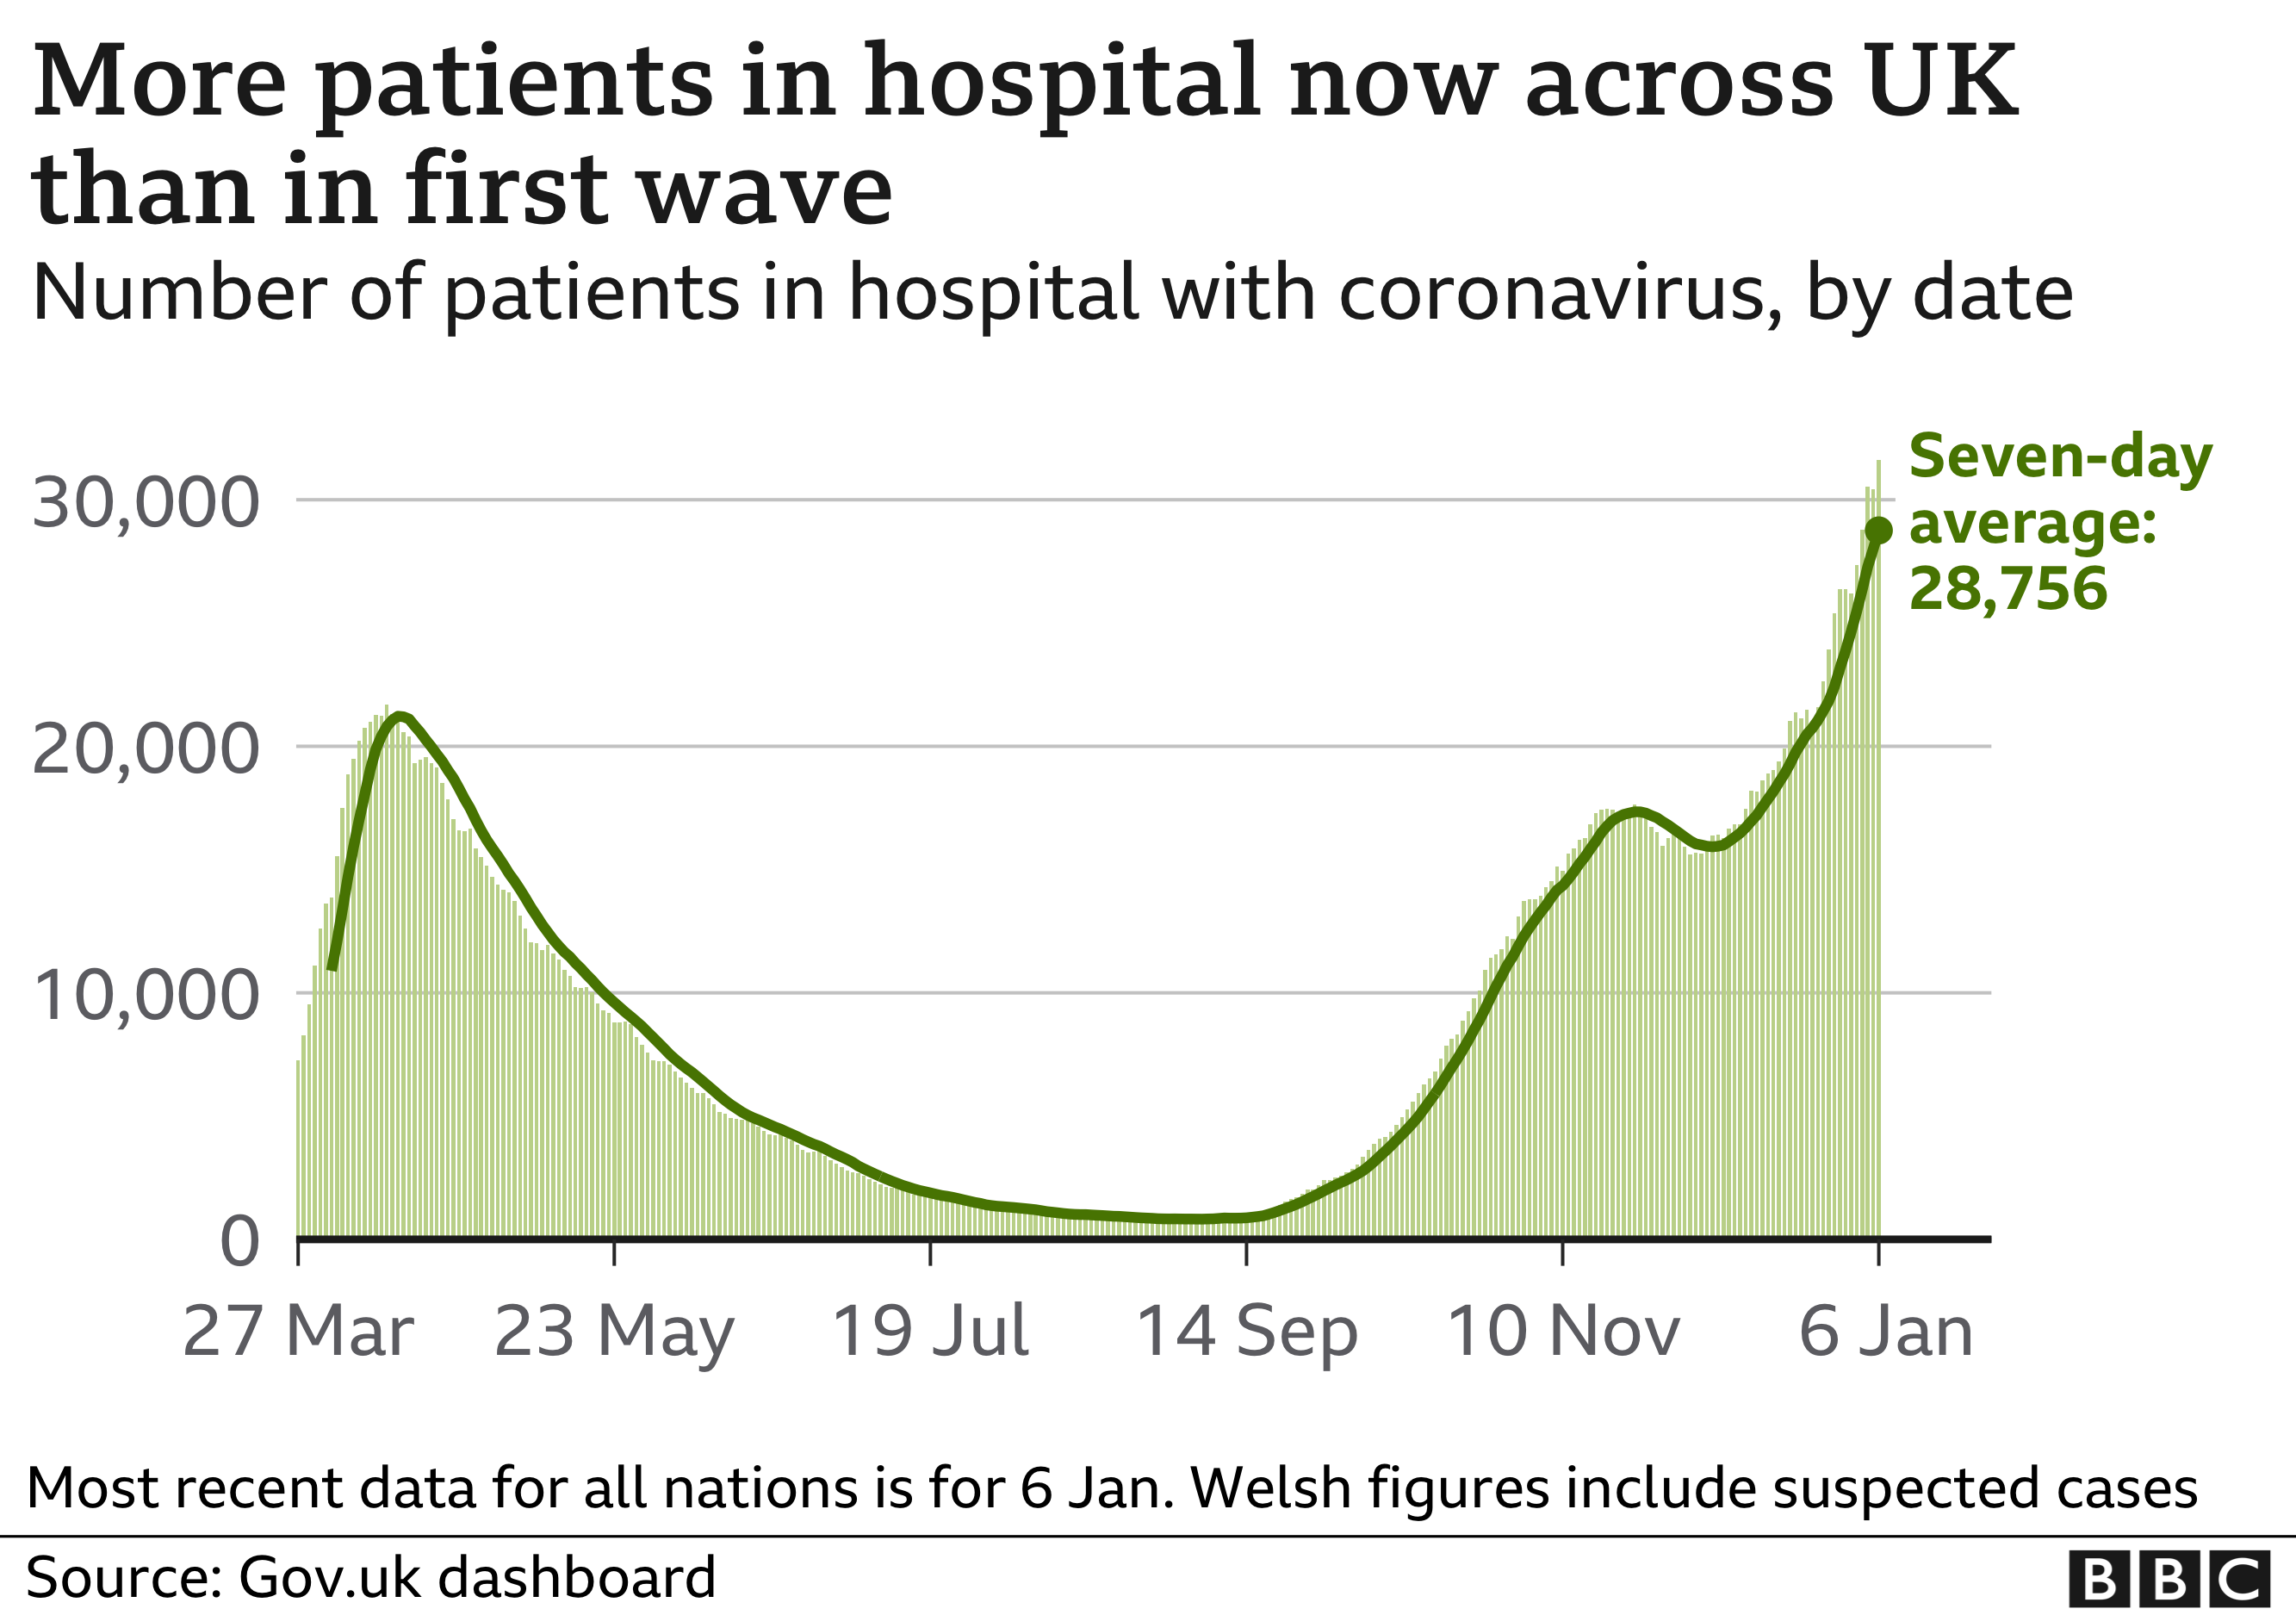 Chart shows number in hospital now higher than in first wave